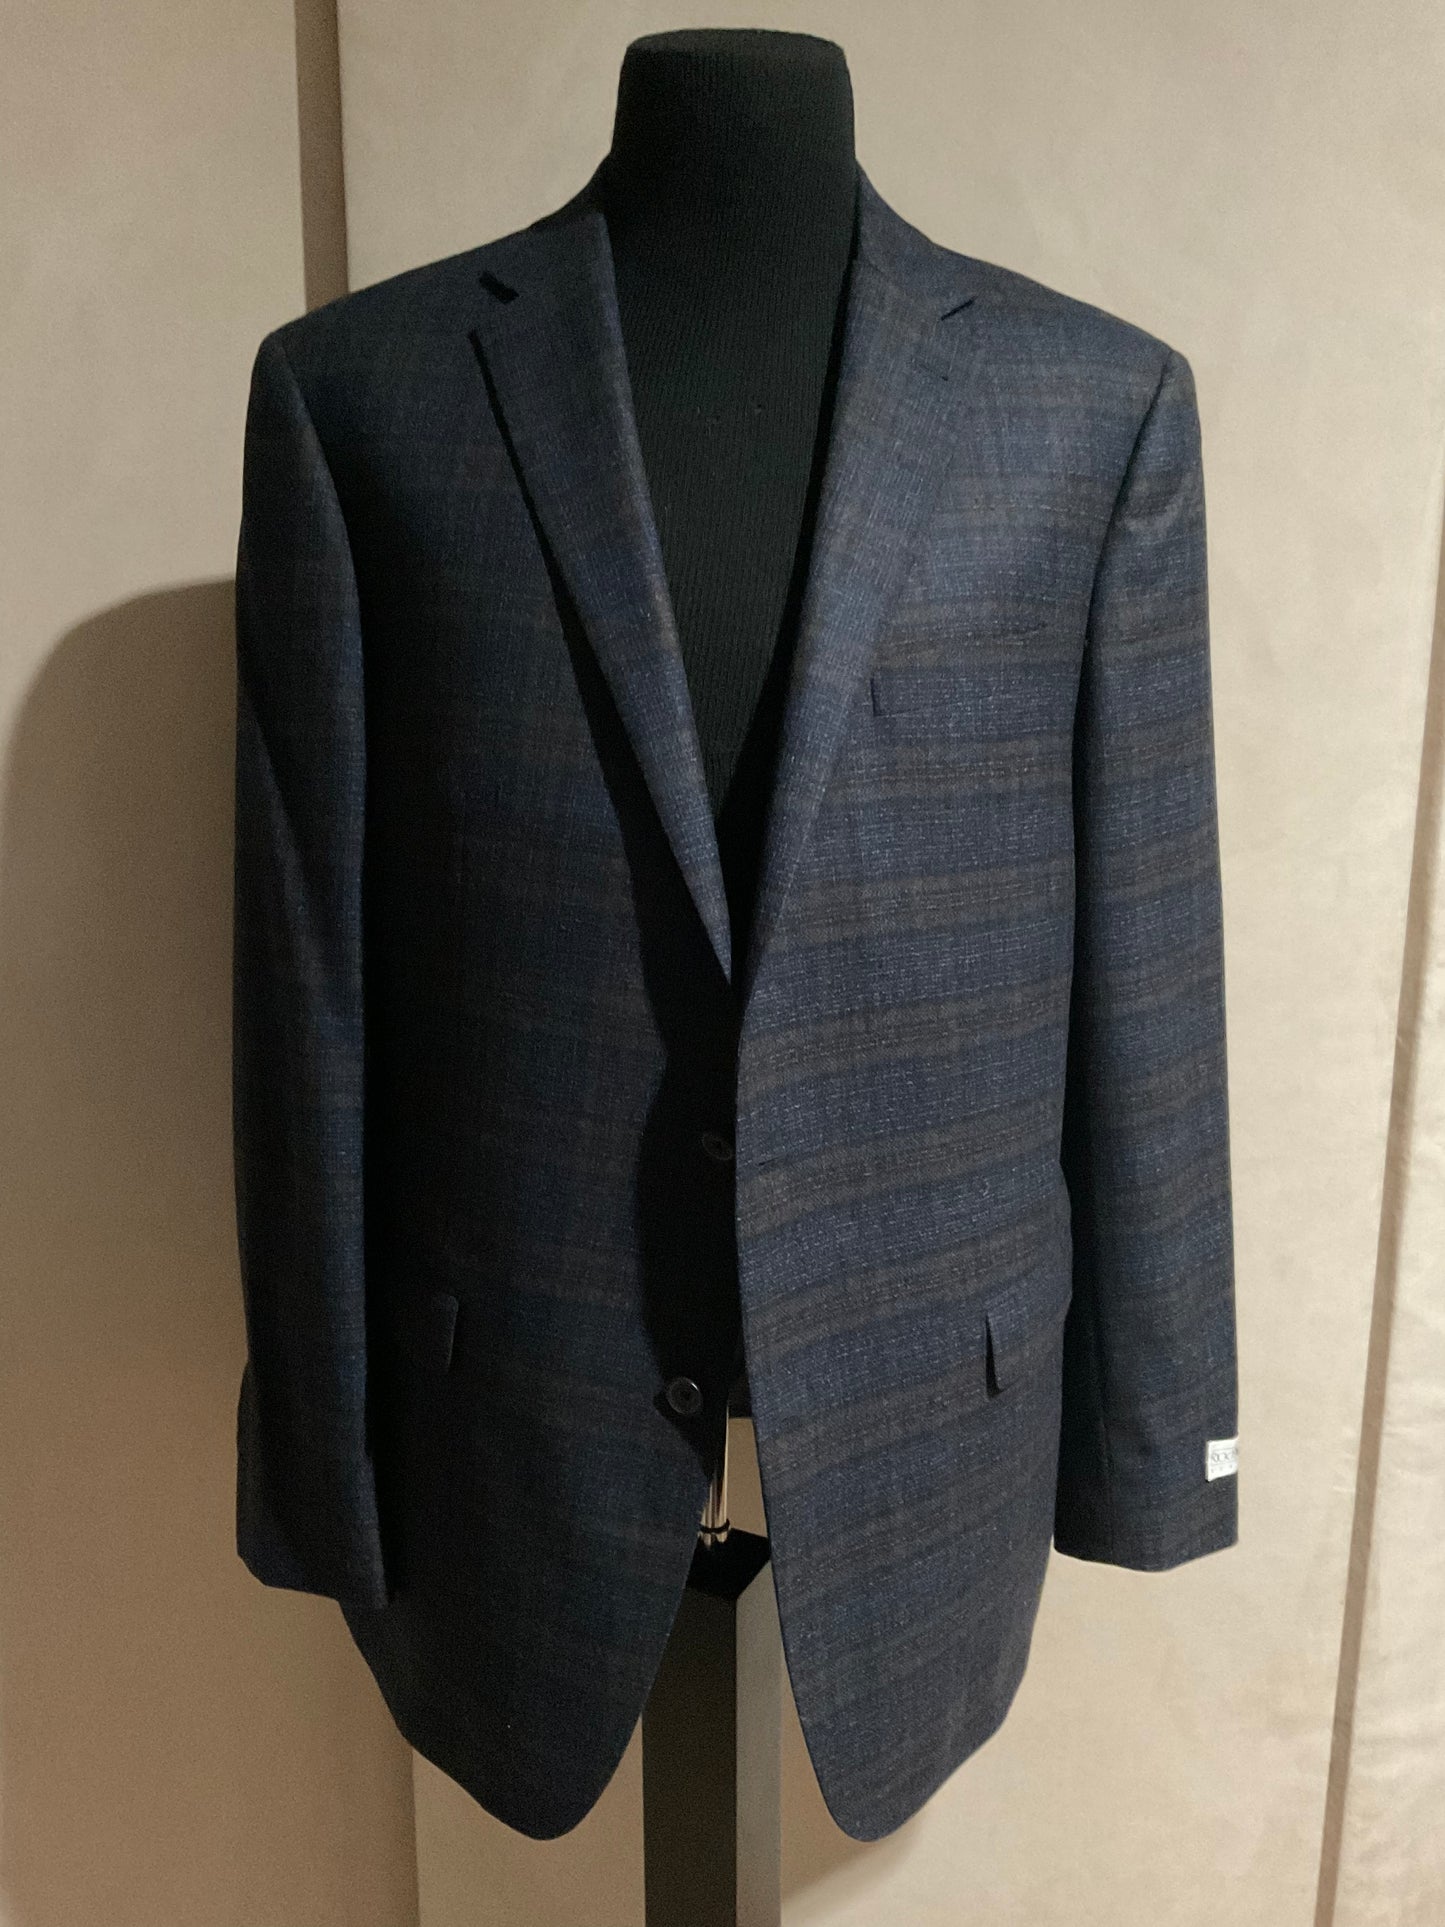 SPORT JACKET / NAVY & BROWN PLAID / NEW / 46 LONG / MADE IN CANADA